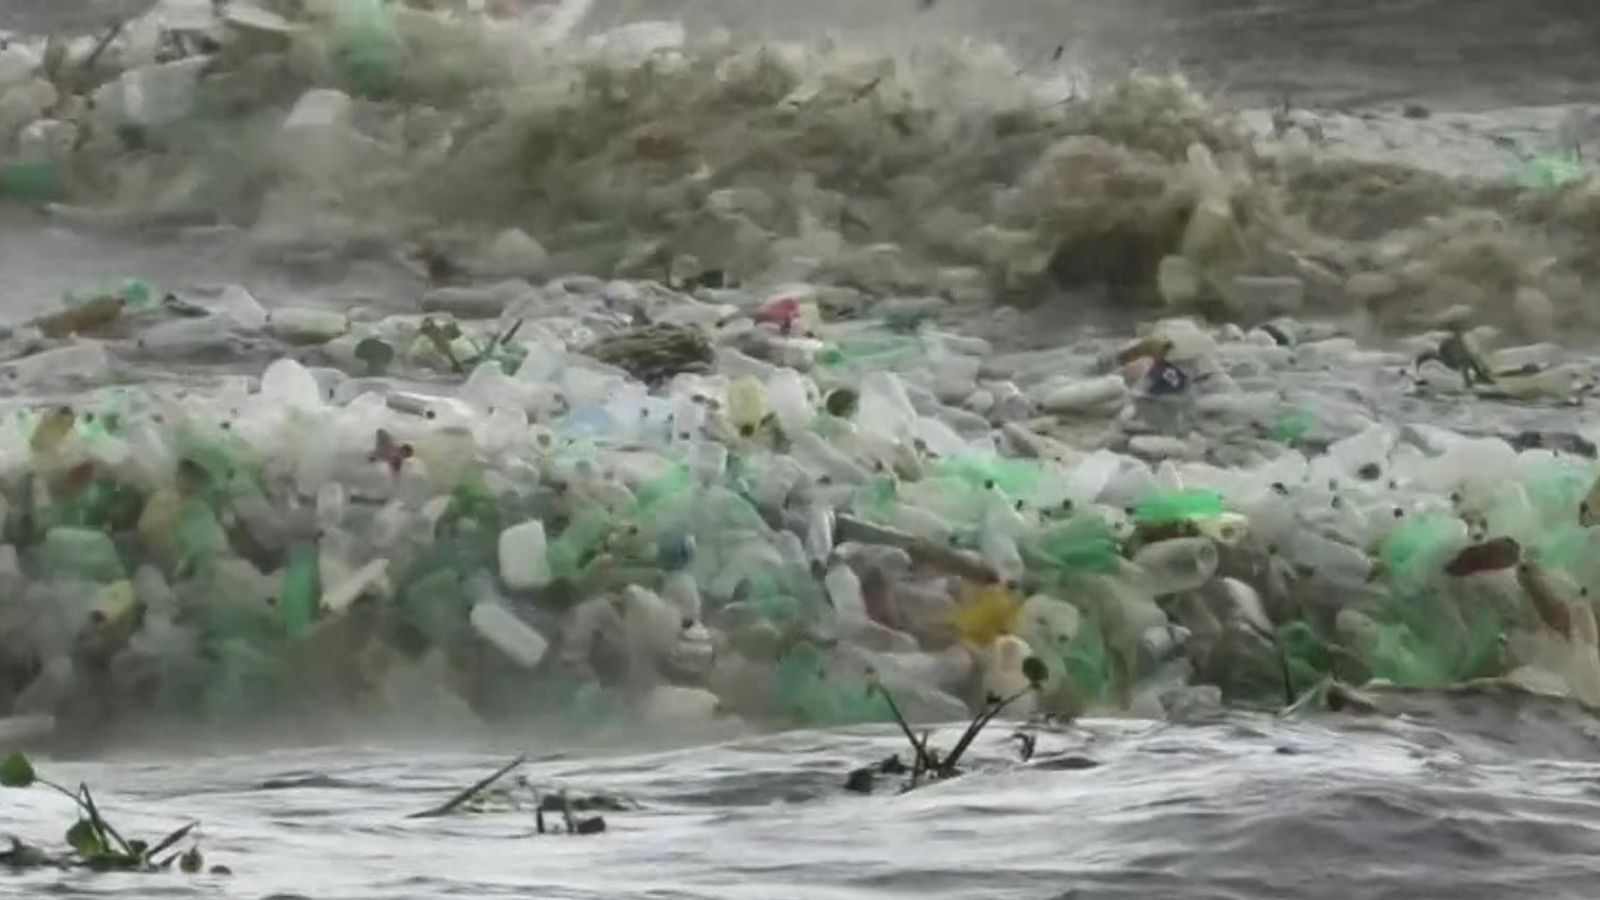 Waves of garbage wash onto beach in South Africa